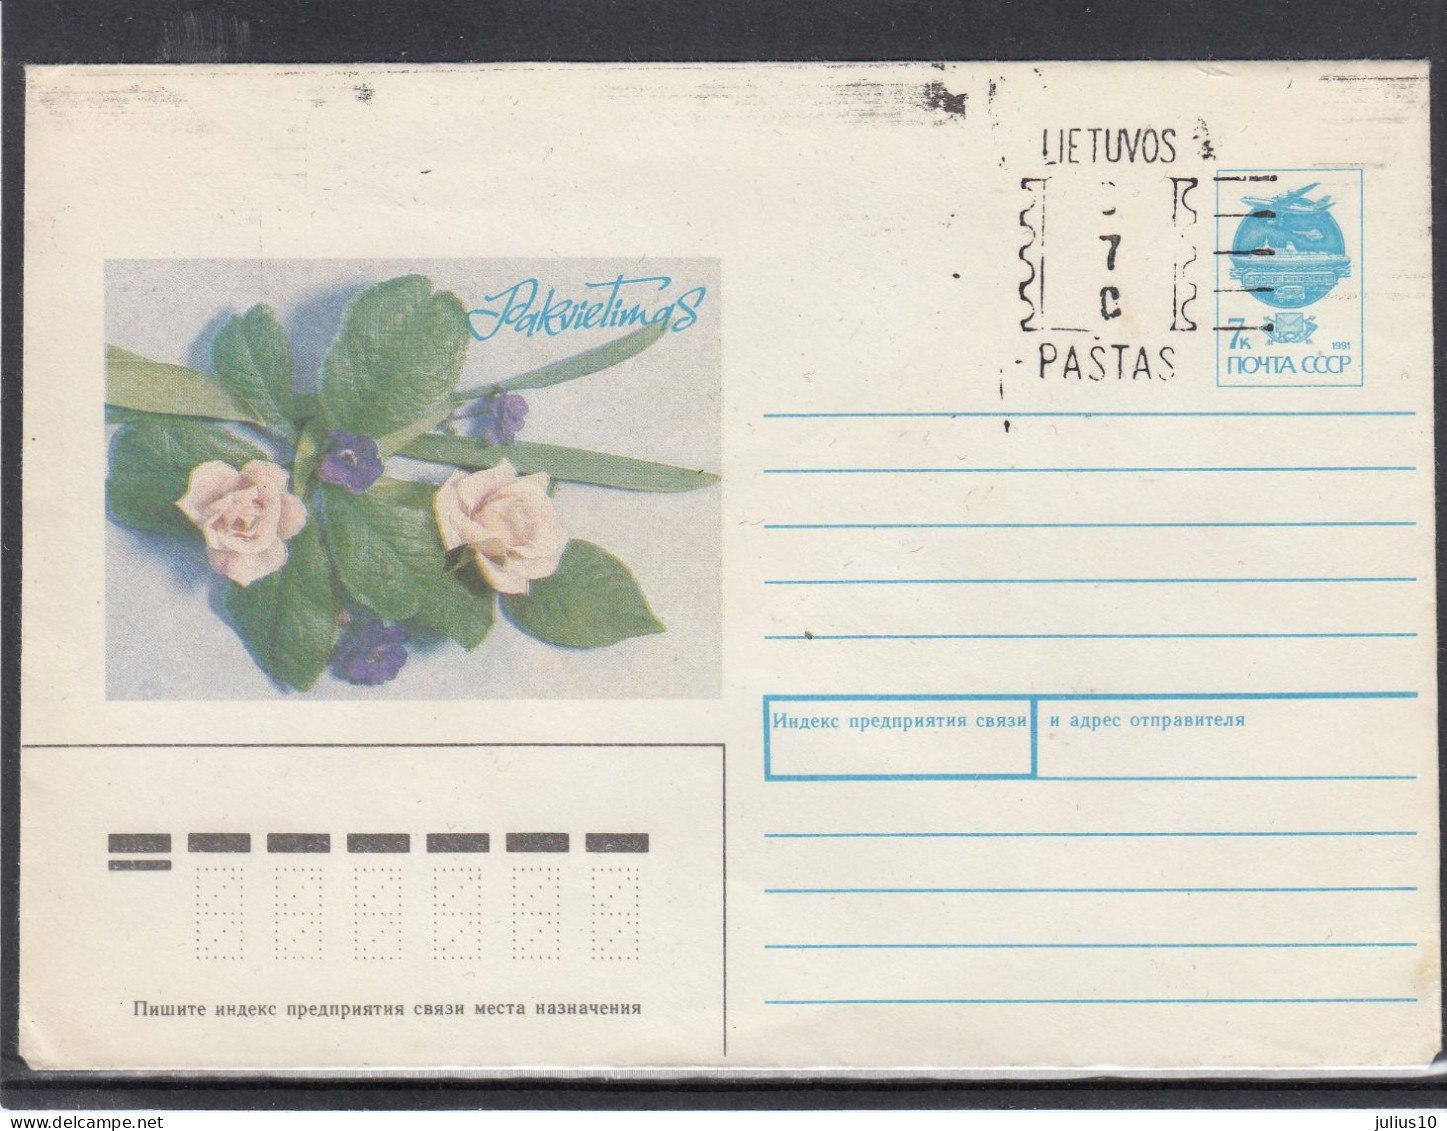 LITHUANIA (USSR) 1990 Cover Greetings Flowers Roses #LTV63 - Lithuania